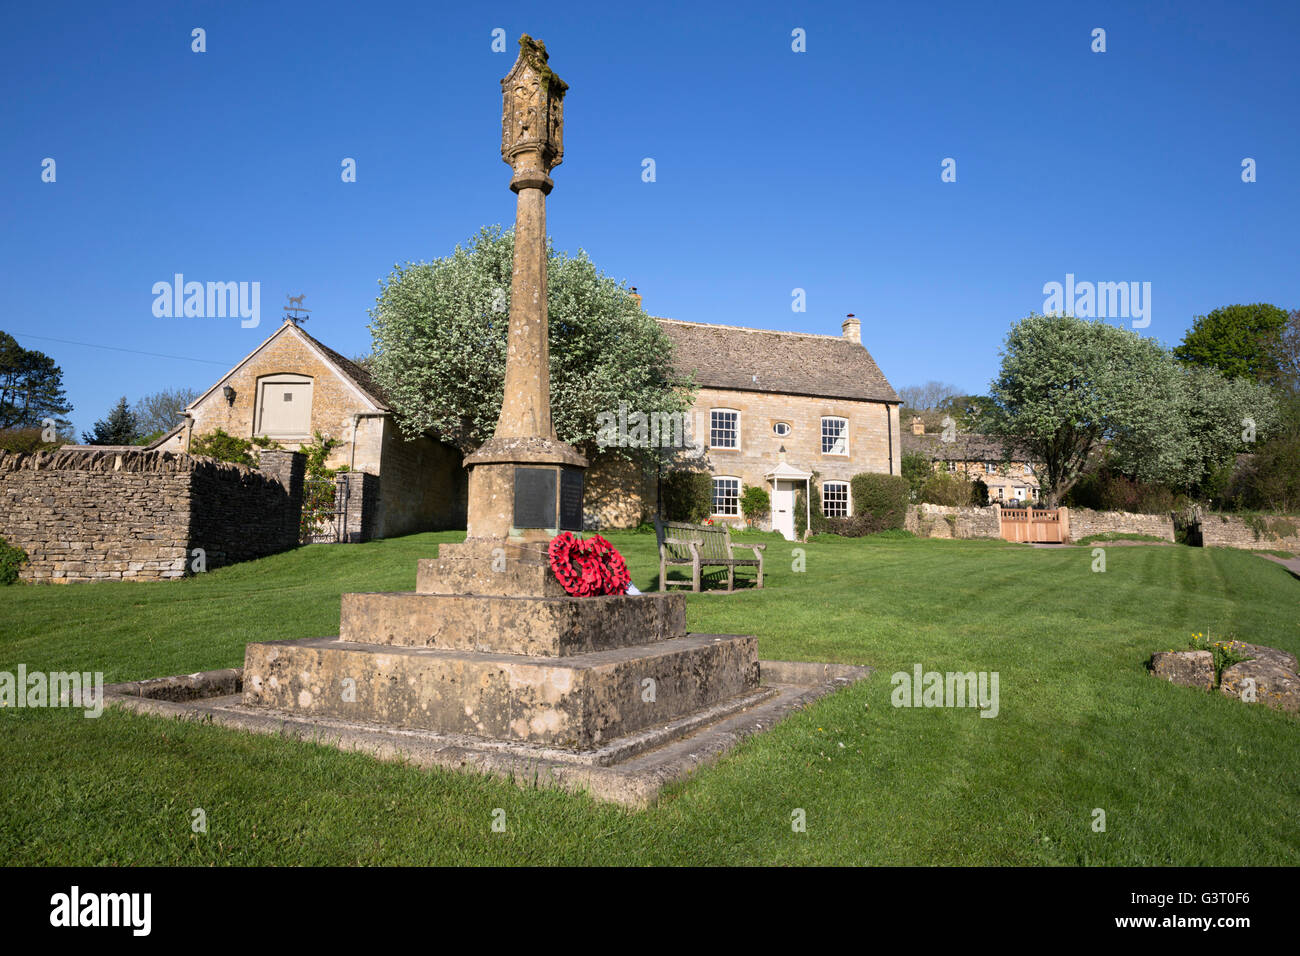 War Memorial et village green, Guiting Power, Cotswolds, Gloucestershire, Angleterre, Royaume-Uni, Europe Banque D'Images